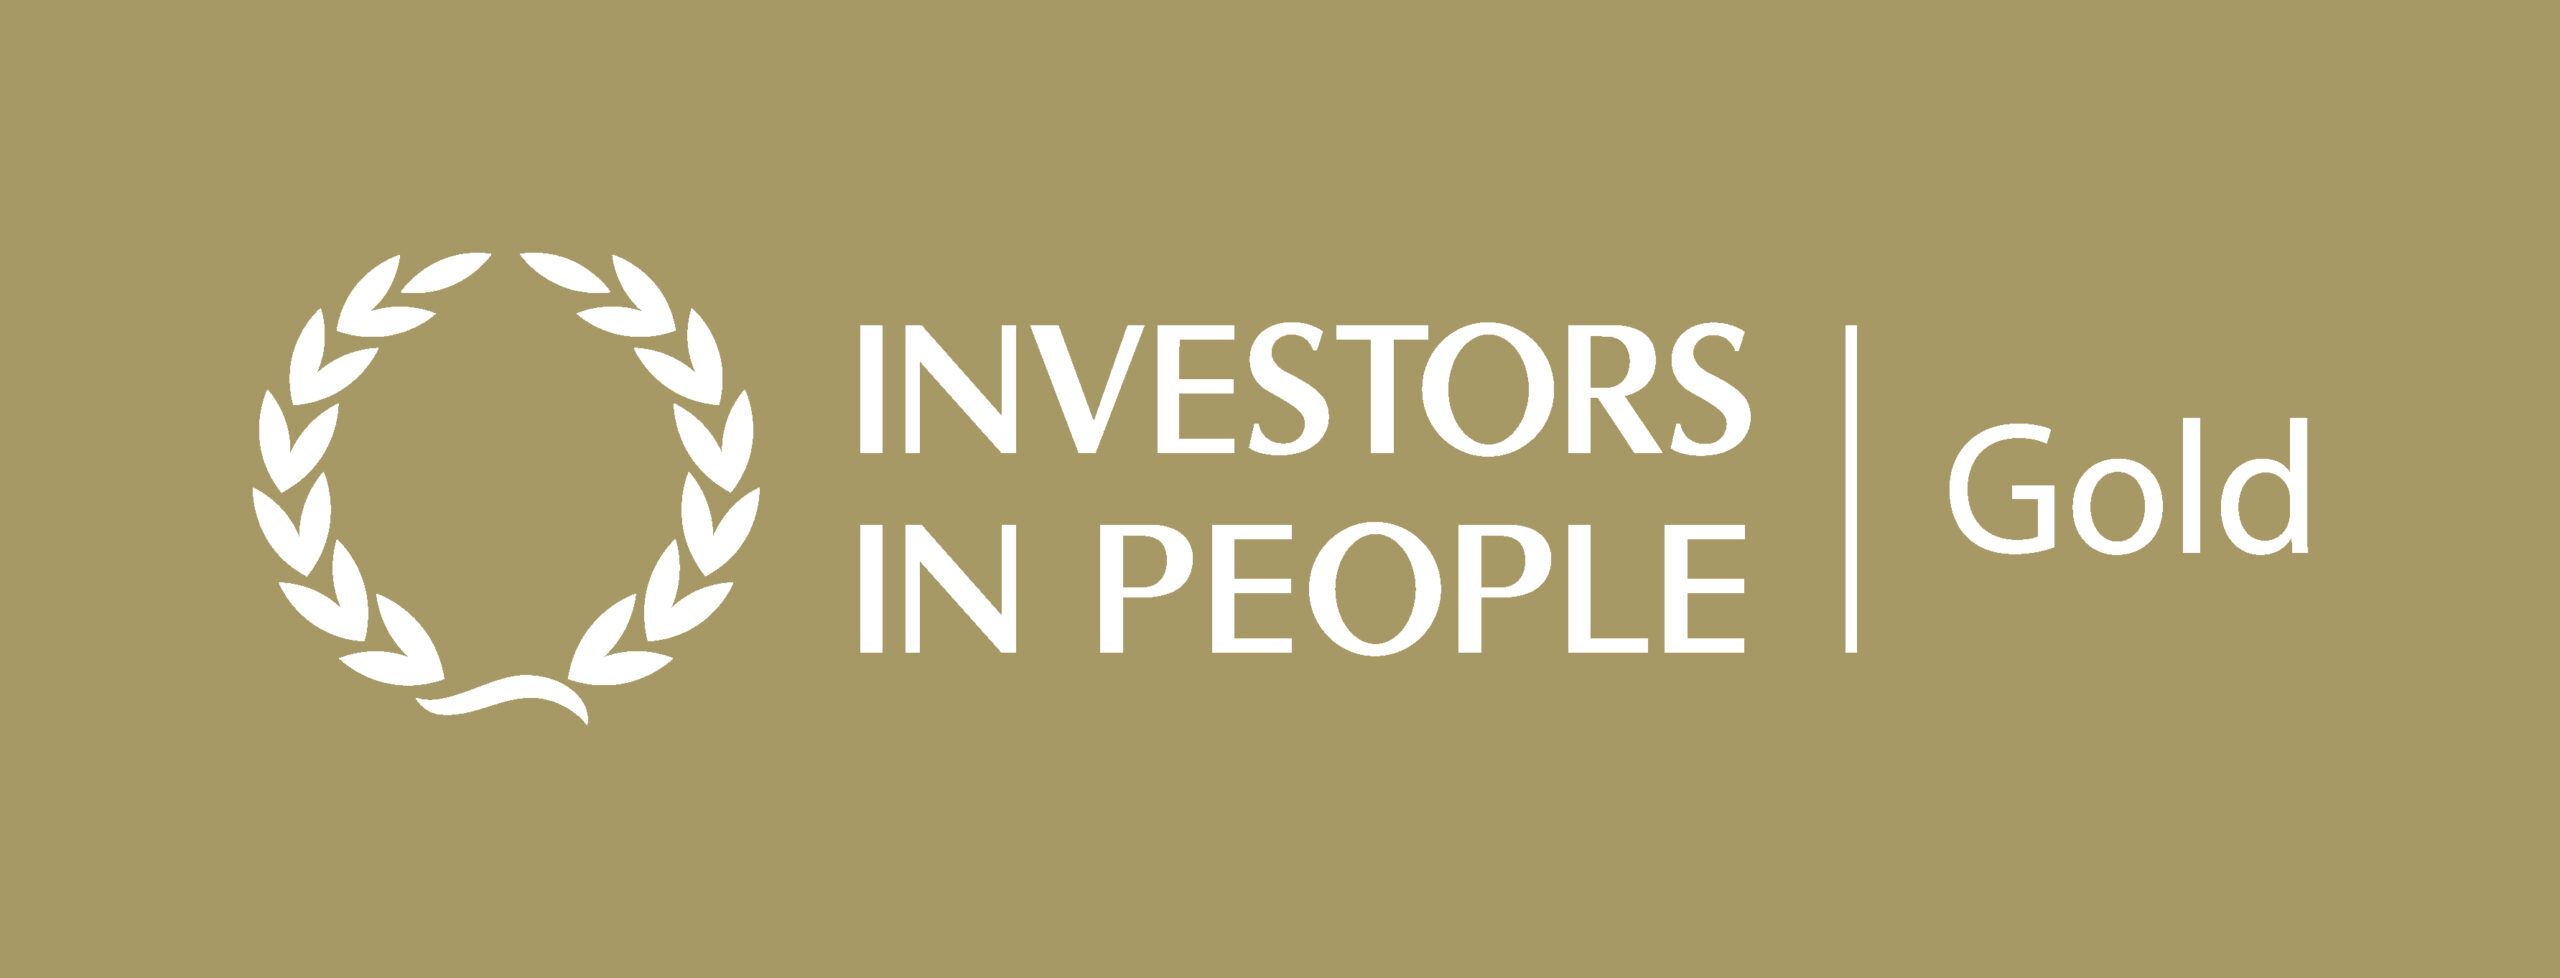 Investors In People – Gold Award - Playle & Partners LLP